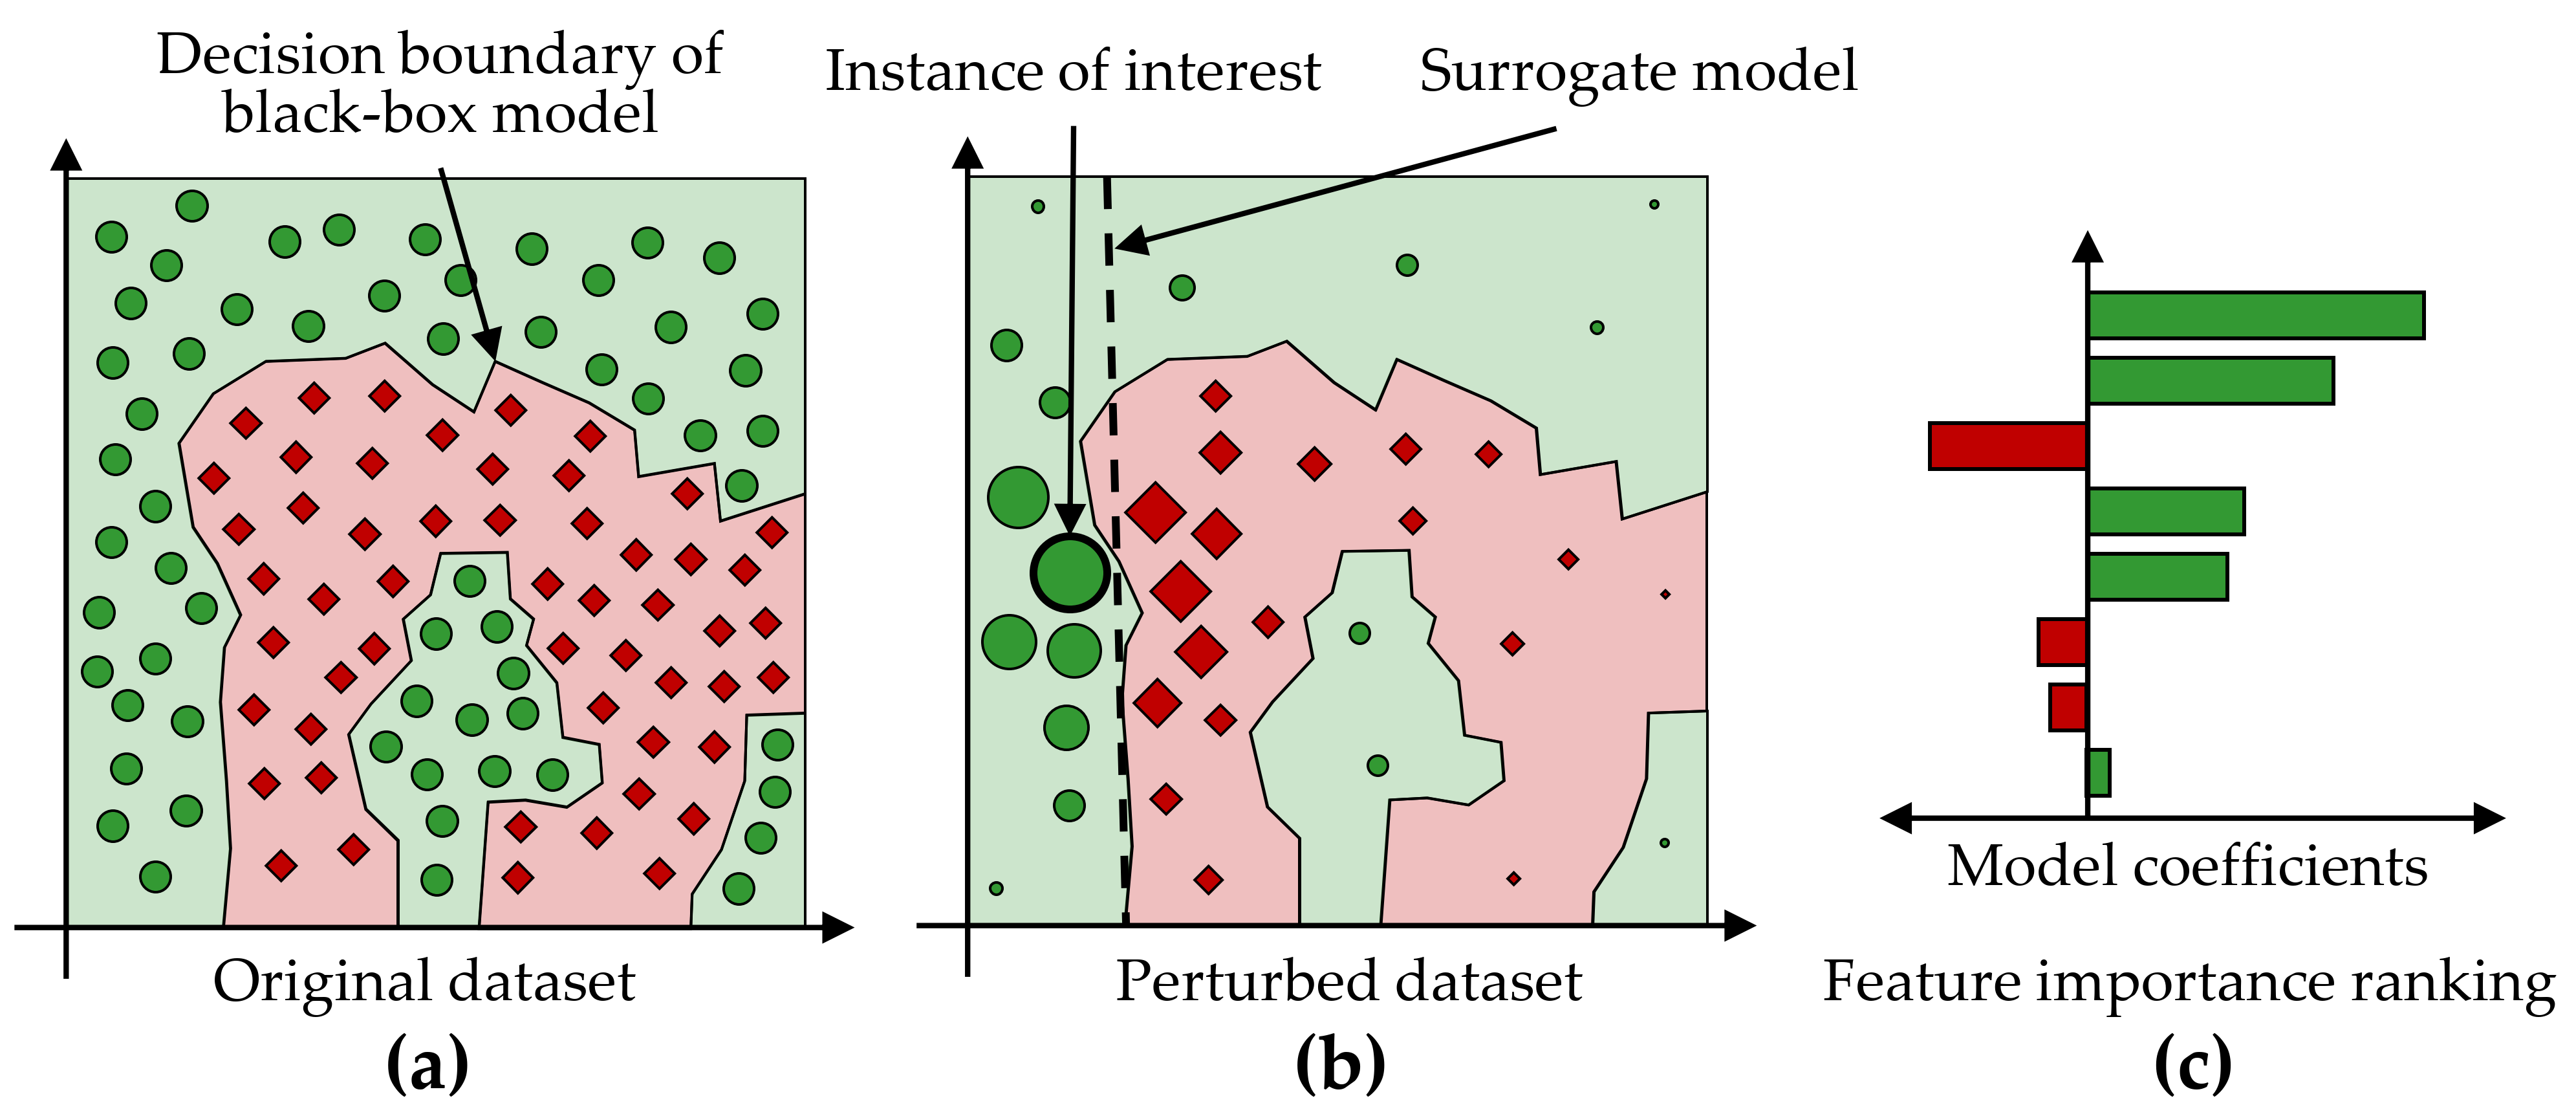 Illustration of LIME’s main ideas. (a) A data set with a two-class problem represented as a two-dimensional scatterplot for simplicity. The non-linear decision boundary of a black-box model cannot be easily explained. (b) LIME aims to approximate a black-box model’s predictions in the vicinity of an instance of interest by an intrinsically interpretable model, such as a logistic regression model. The dashed line shows the linear decision boundary of this surrogate model. (c) A feature importance ranking can be derived from the model coefficients.